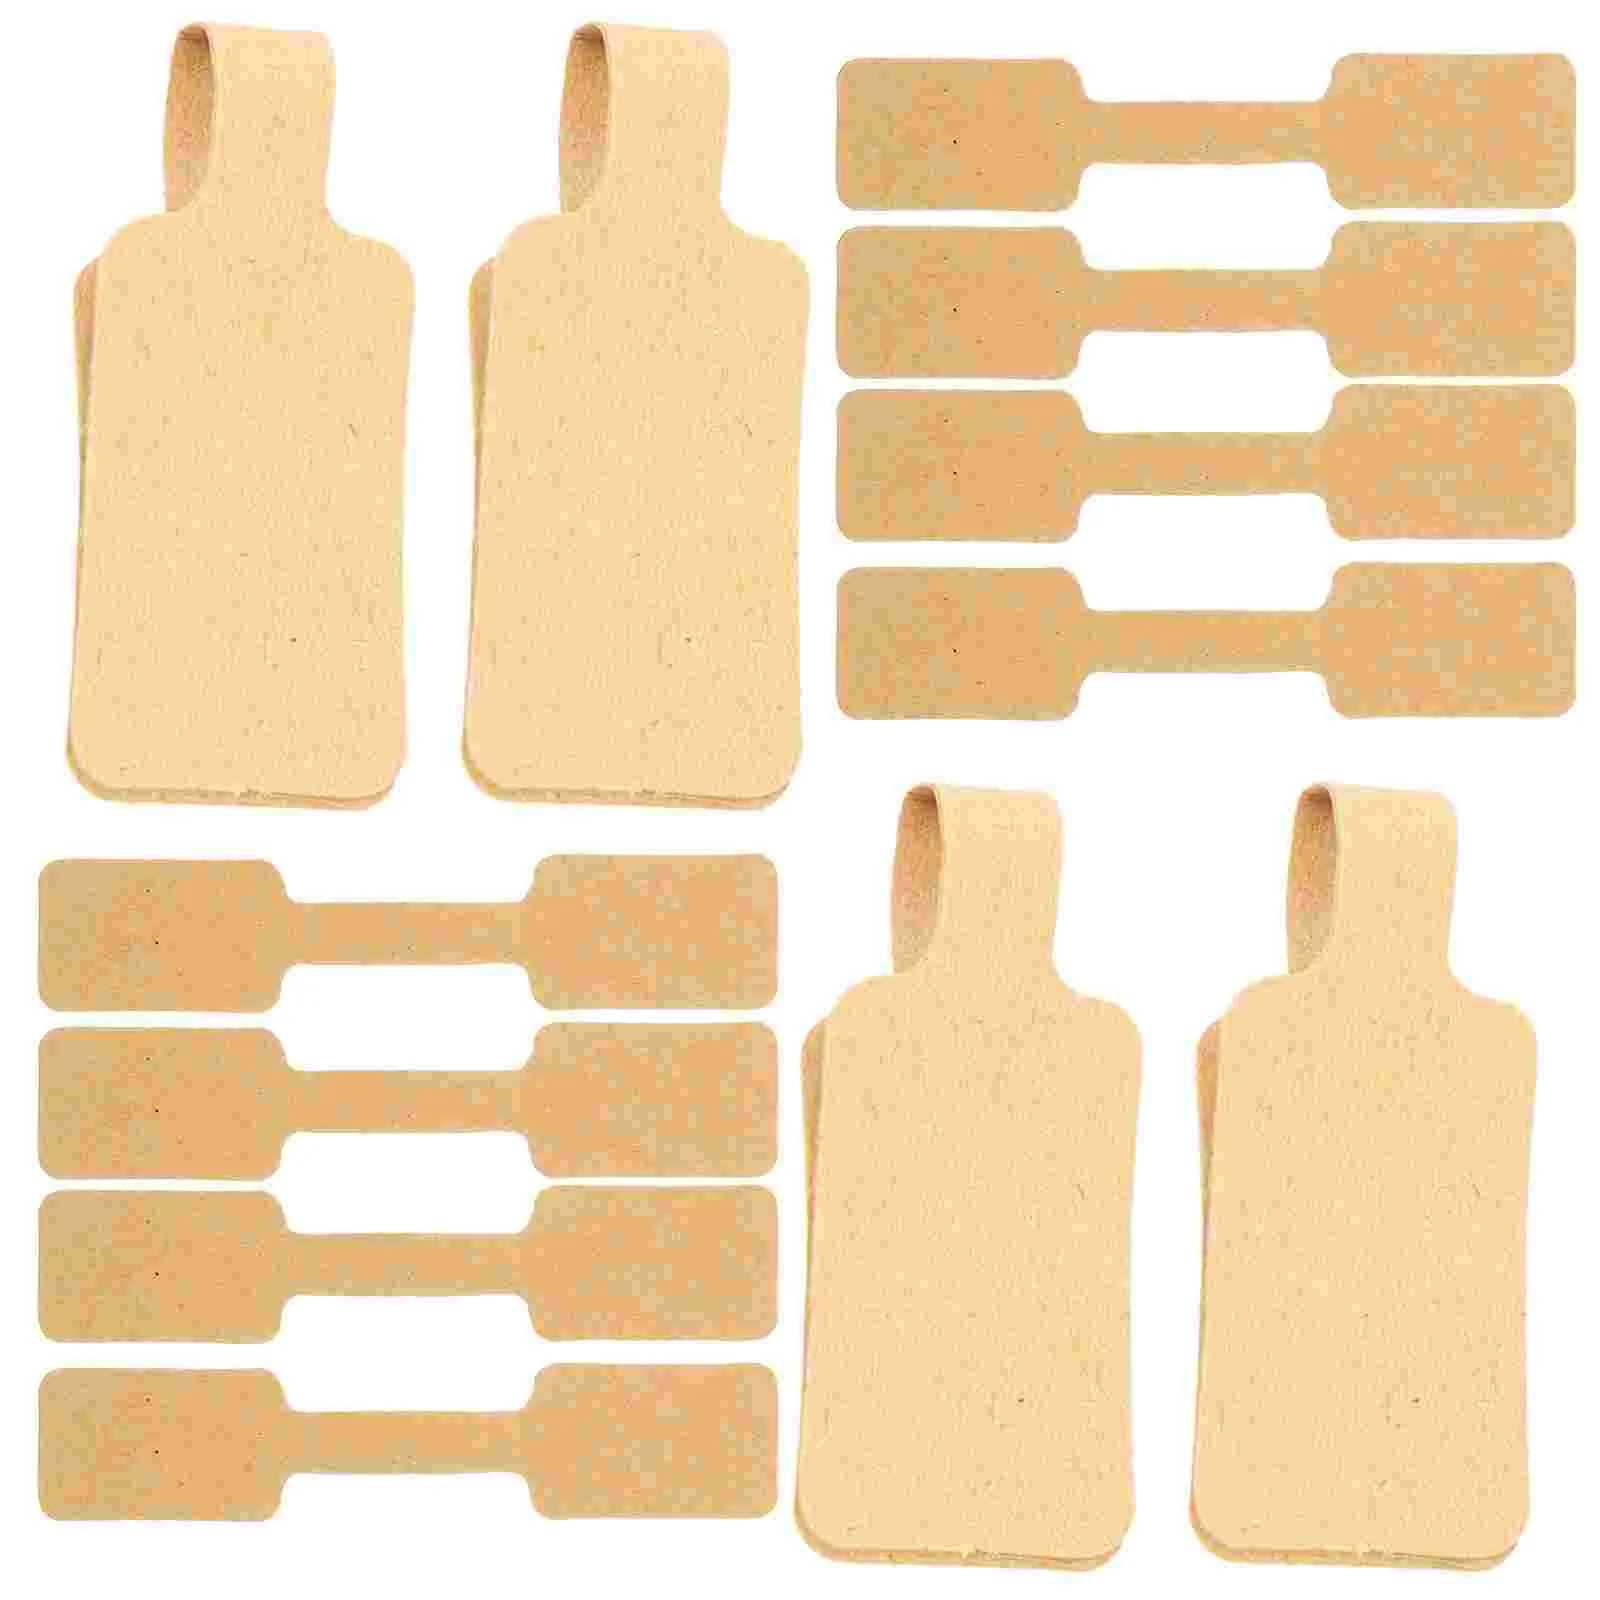 

100Pcs Jewelry Price Tags Displaying Price Tags Adhesive Stickers Tags Jewelry Price Decals Labels